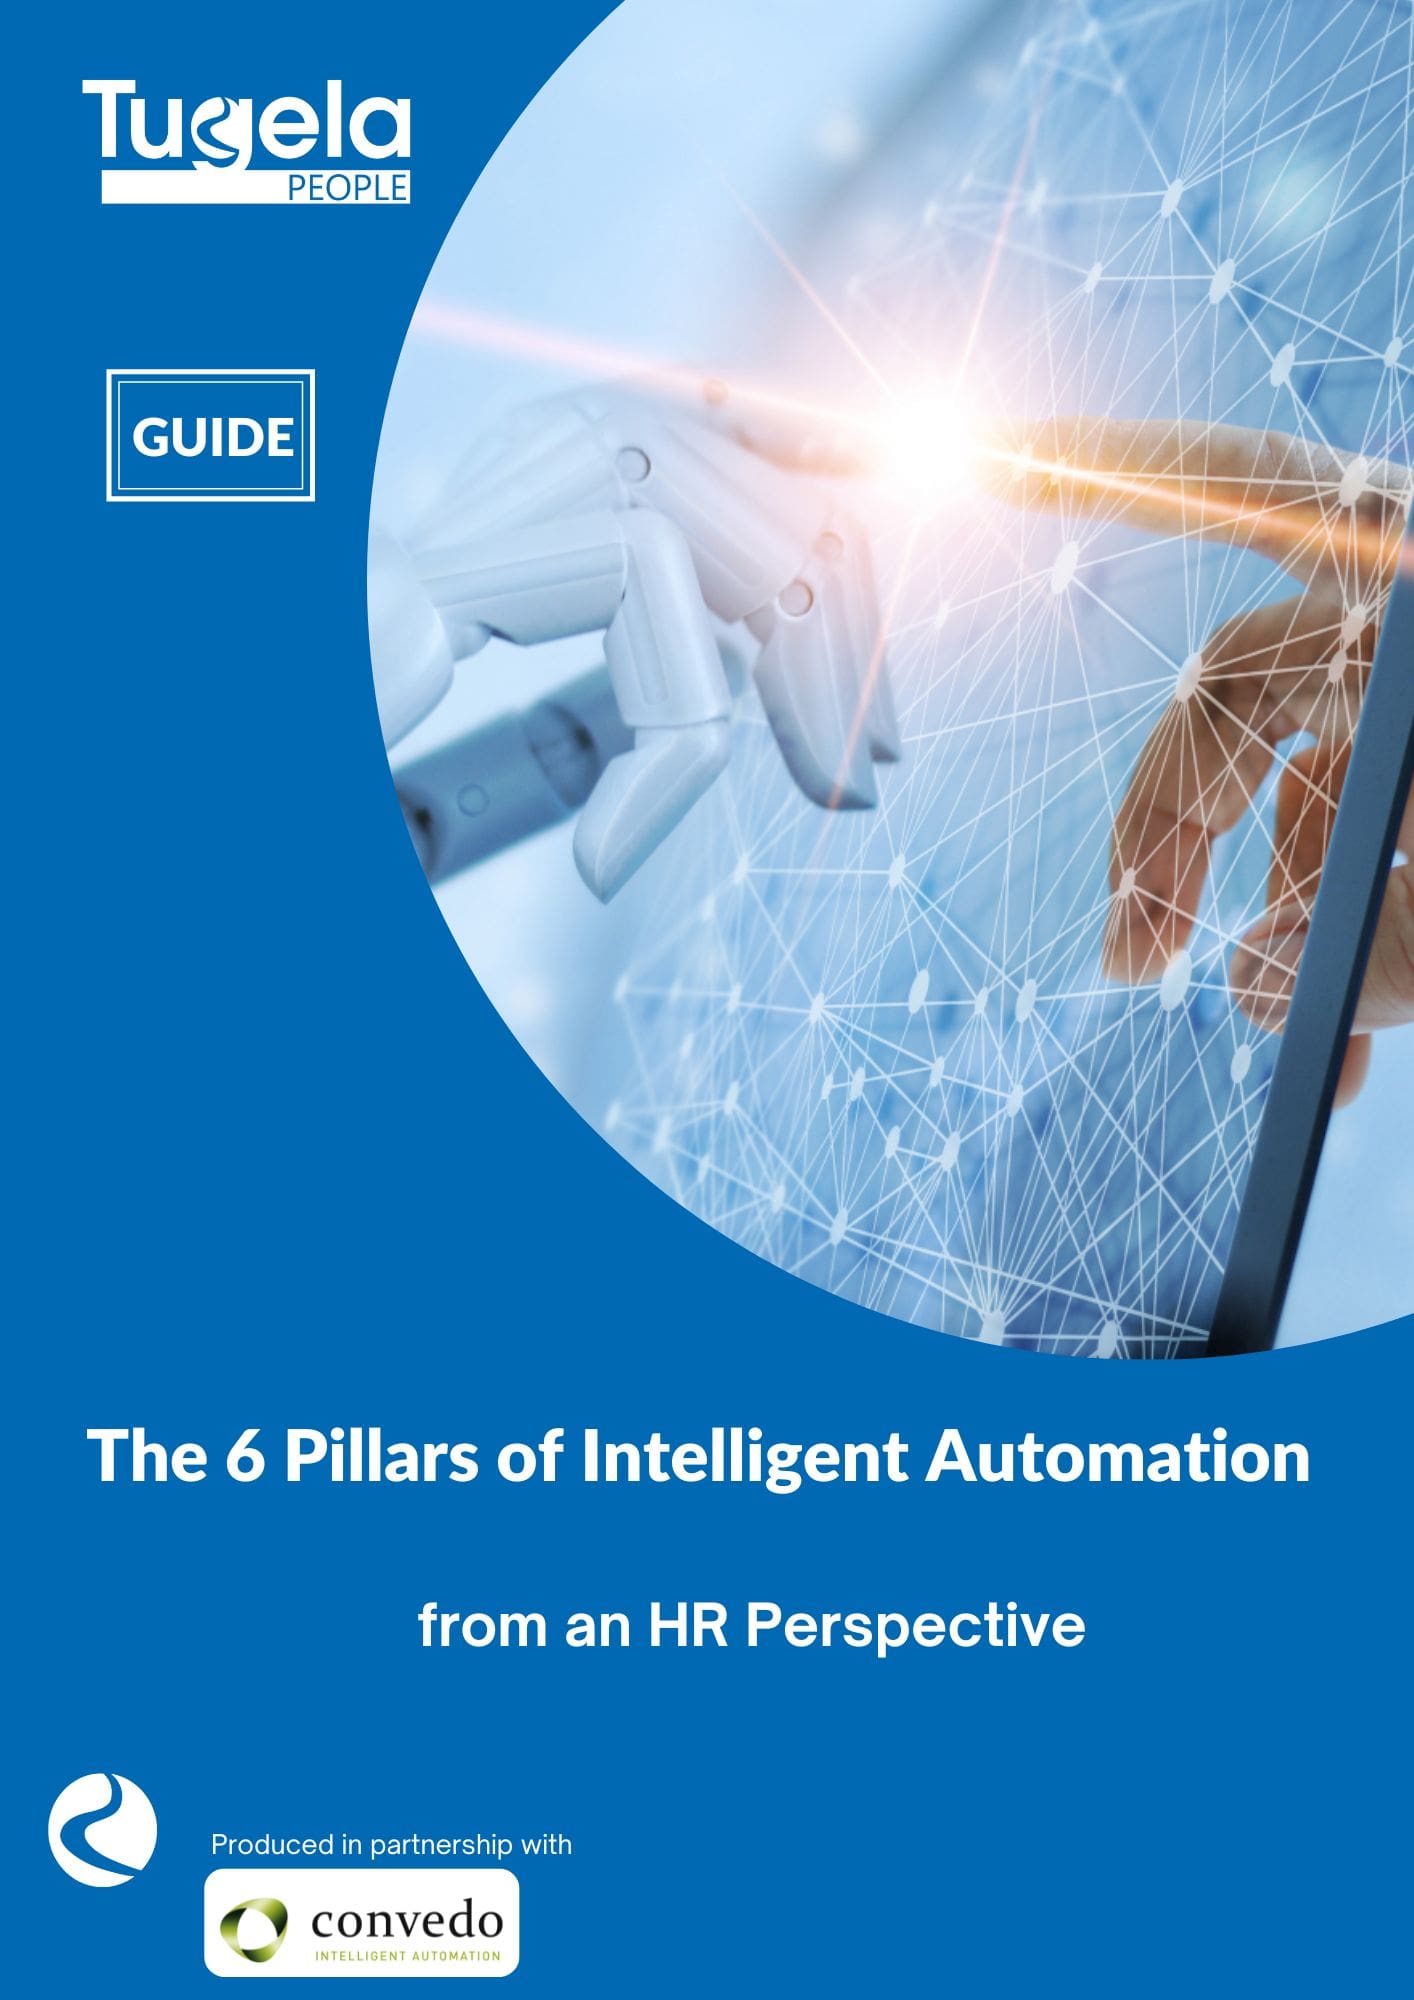 Understanding HR Automation - the 6 pillars. Learn more